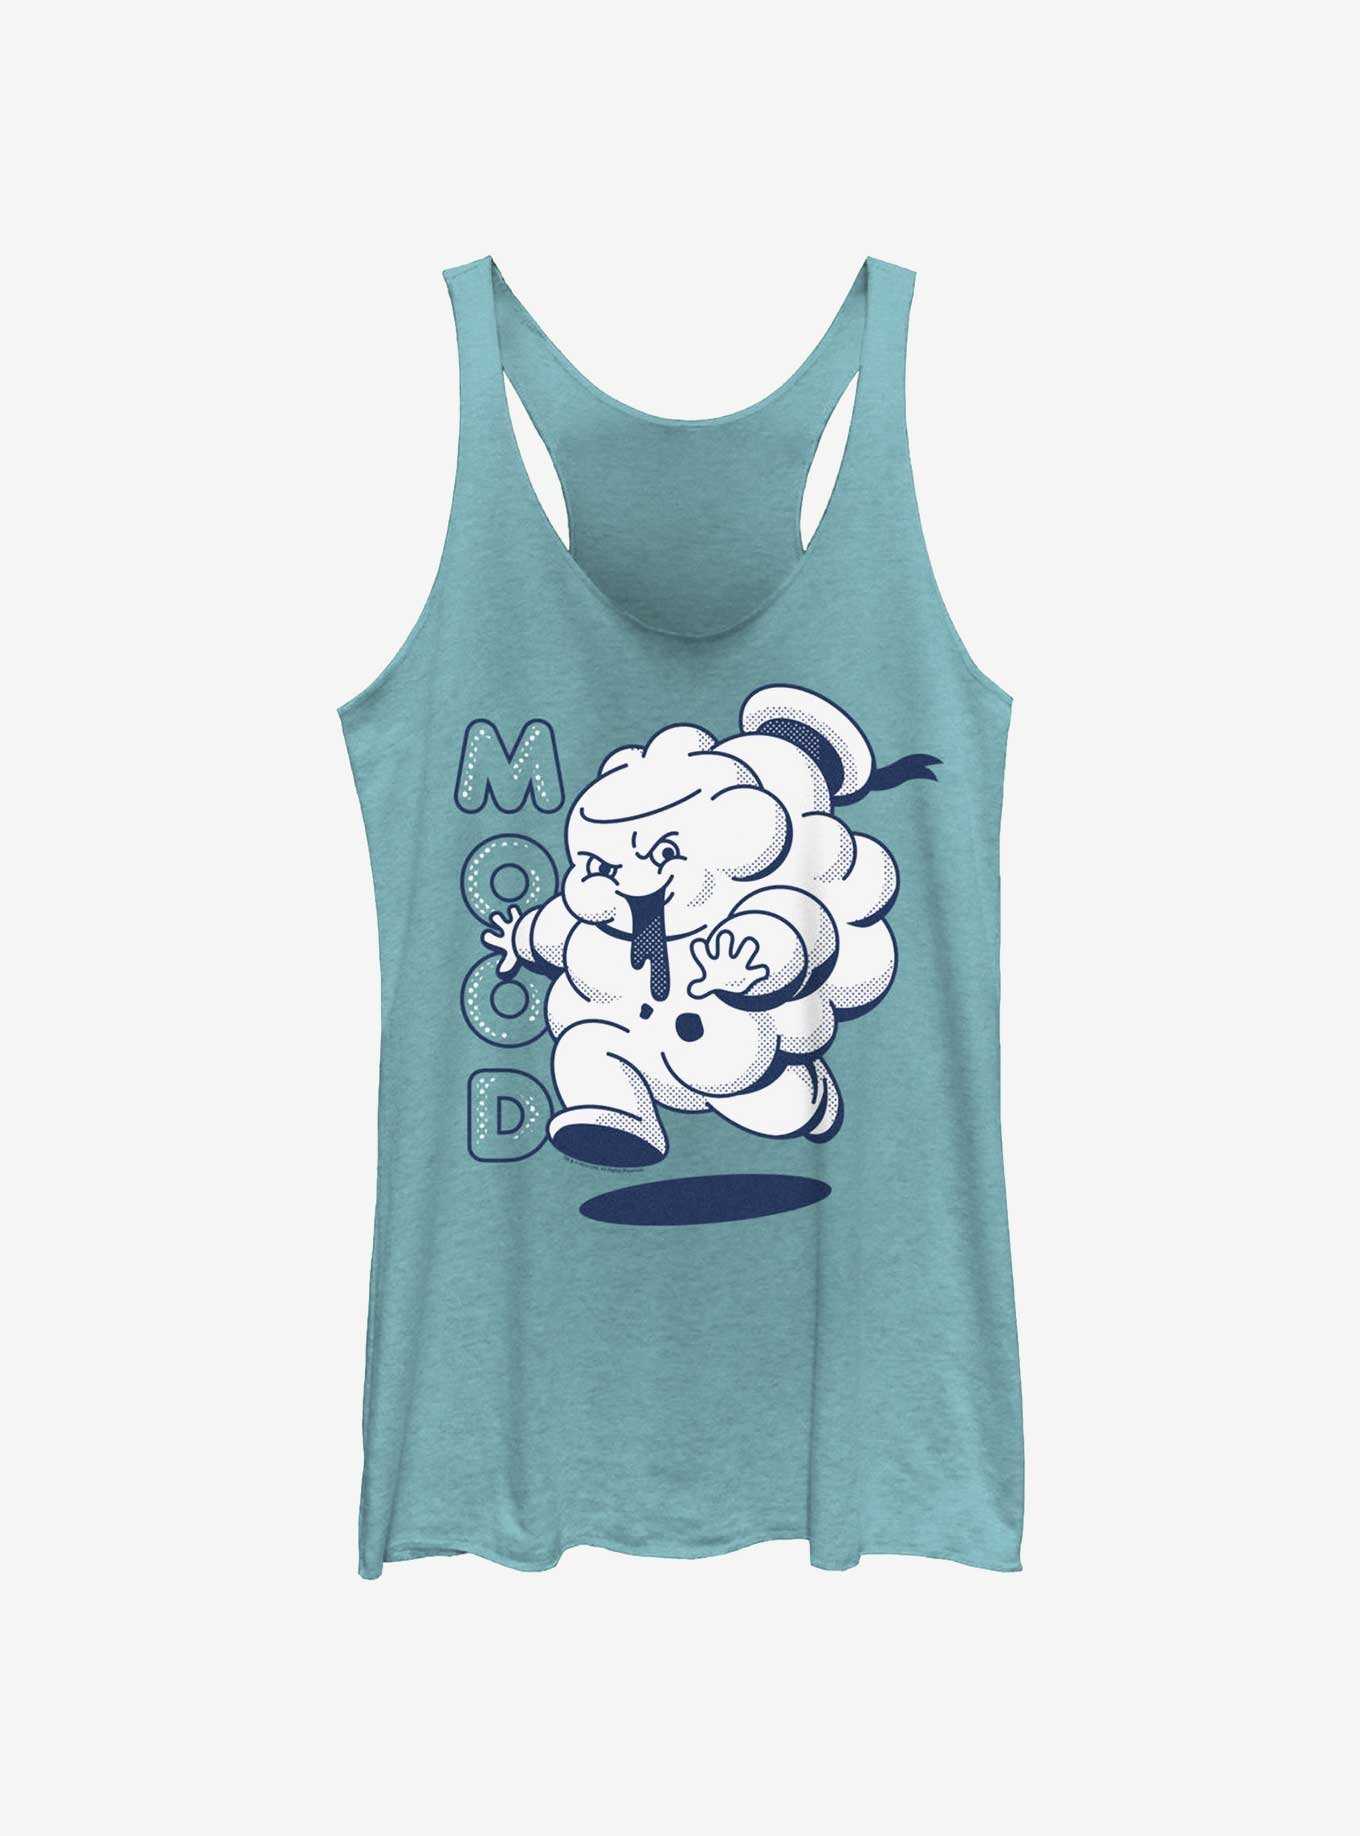 Ghostbusters: Frozen Empire Puft Mood Womens Tank Top, , hi-res